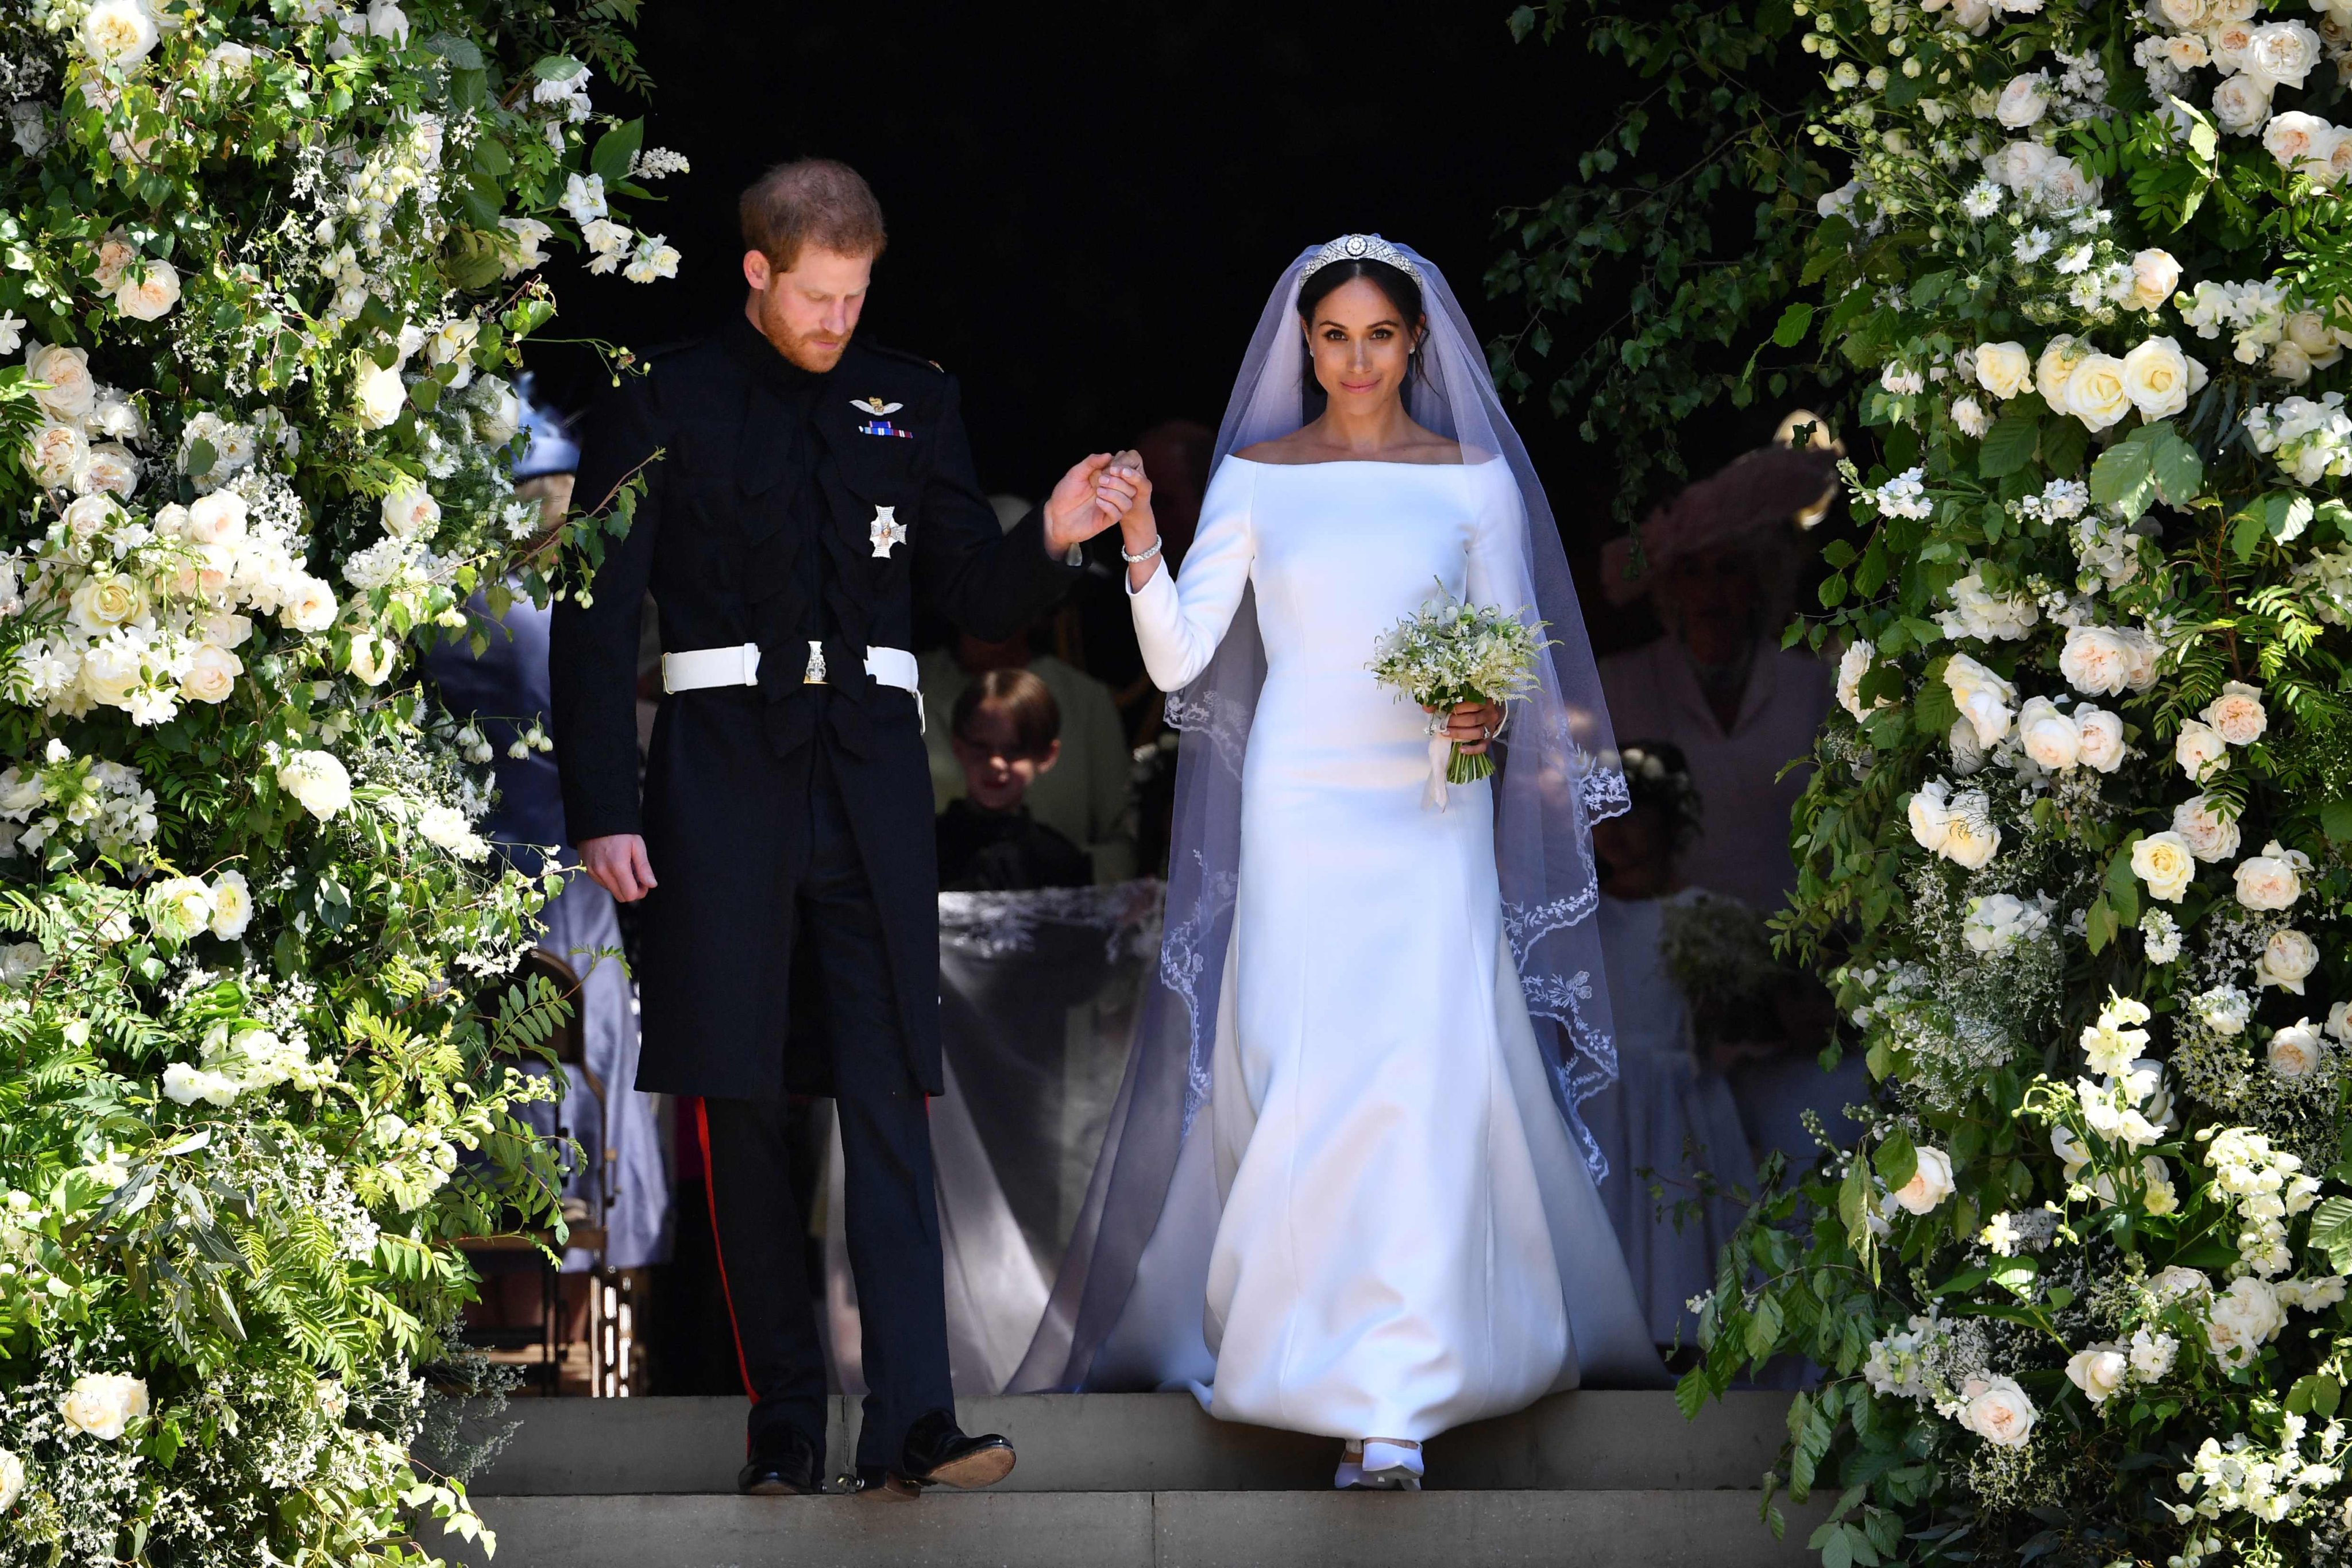 Prince Harry, Duke of Sussex, and his wife Meghan, Duchess of Sussex, on their wedding day. Photo: AFP